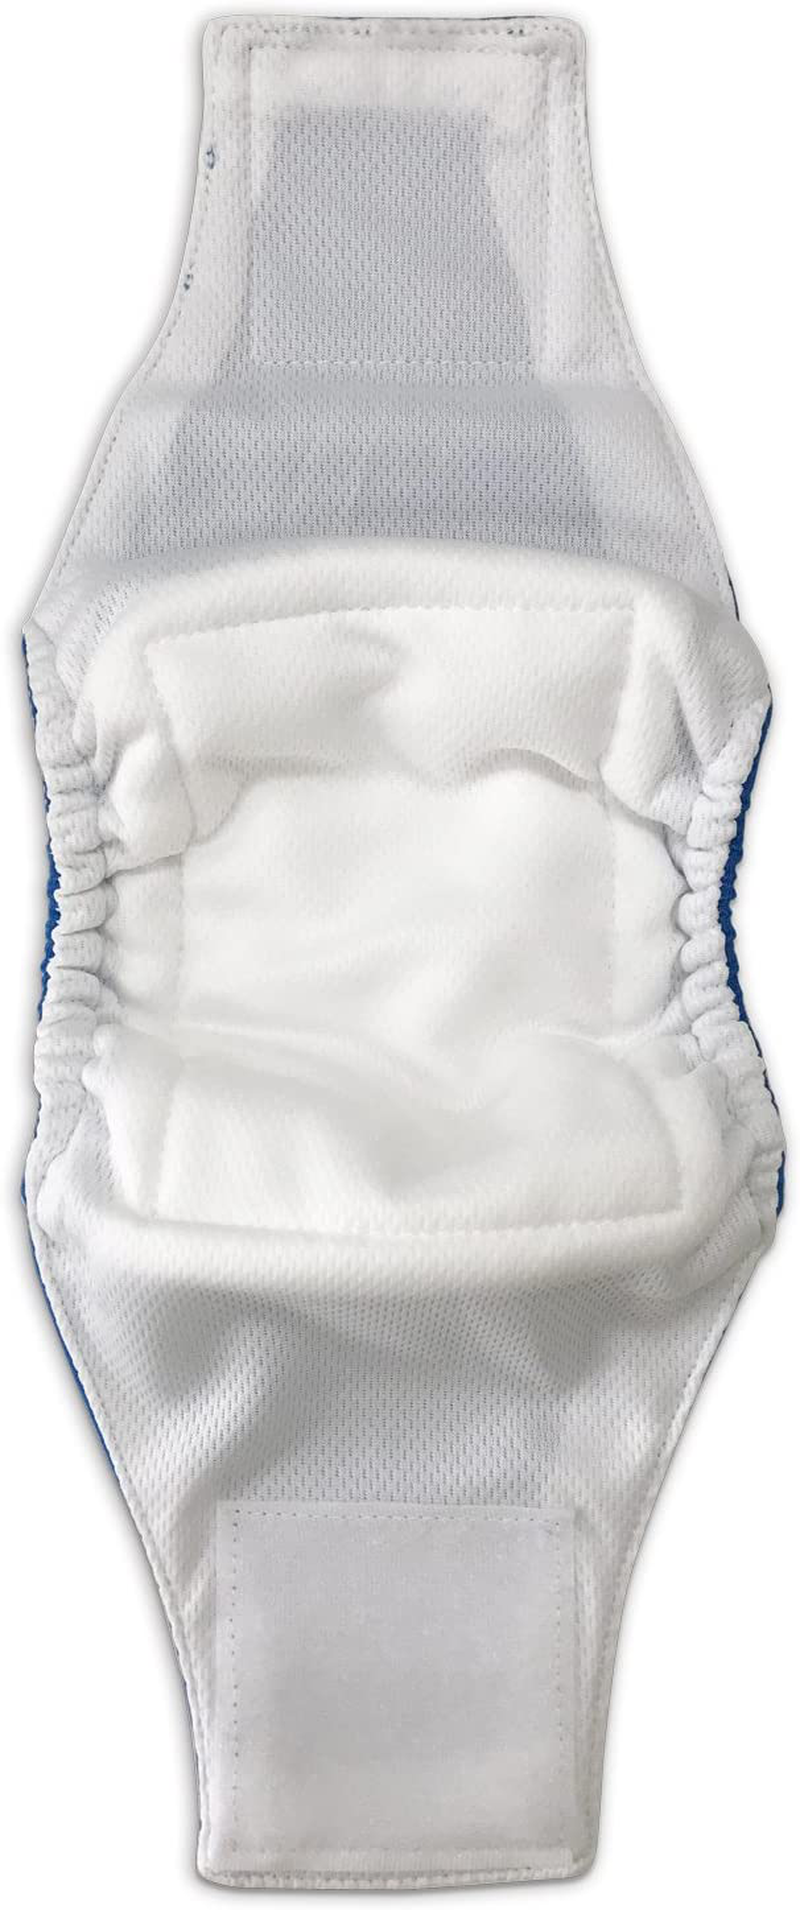 Paw Inspired Male Dog Wraps Washable, Belly Band for Dogs | Washable Dog Diapers, Reusable Male Wraps for Dogs L Cloth Male Dog Diapers for Marking and Excitable Urination Animals & Pet Supplies > Pet Supplies > Dog Supplies > Dog Diaper Pads & Liners Paw Inspired   